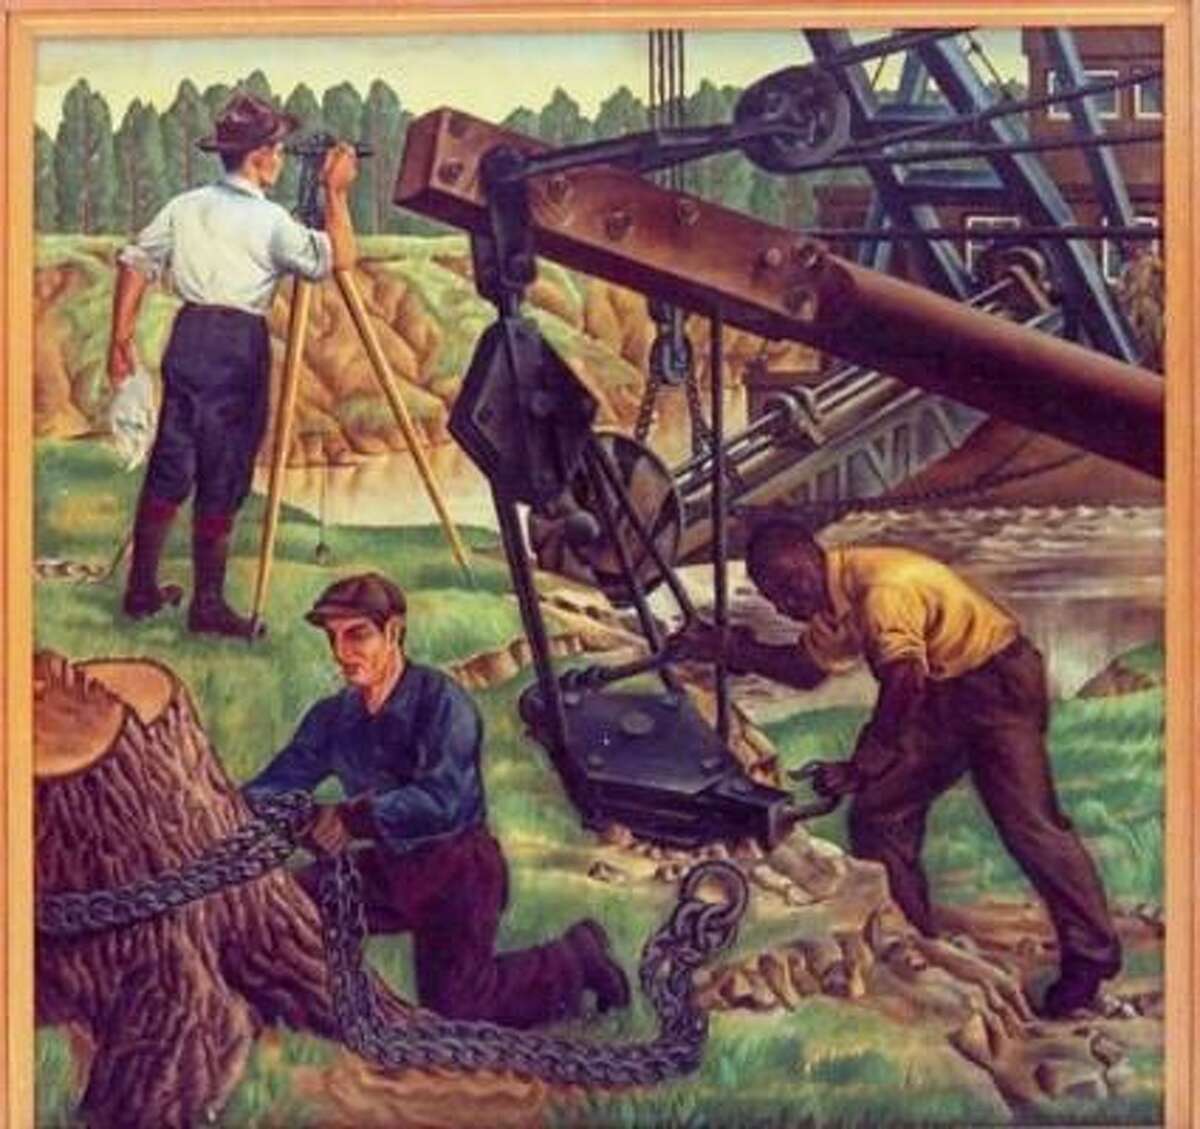 Workers survey and dredge the ship channel in this 1941 painting by Alexandre Hogue titled “Houston Ship Channel – Early History.”